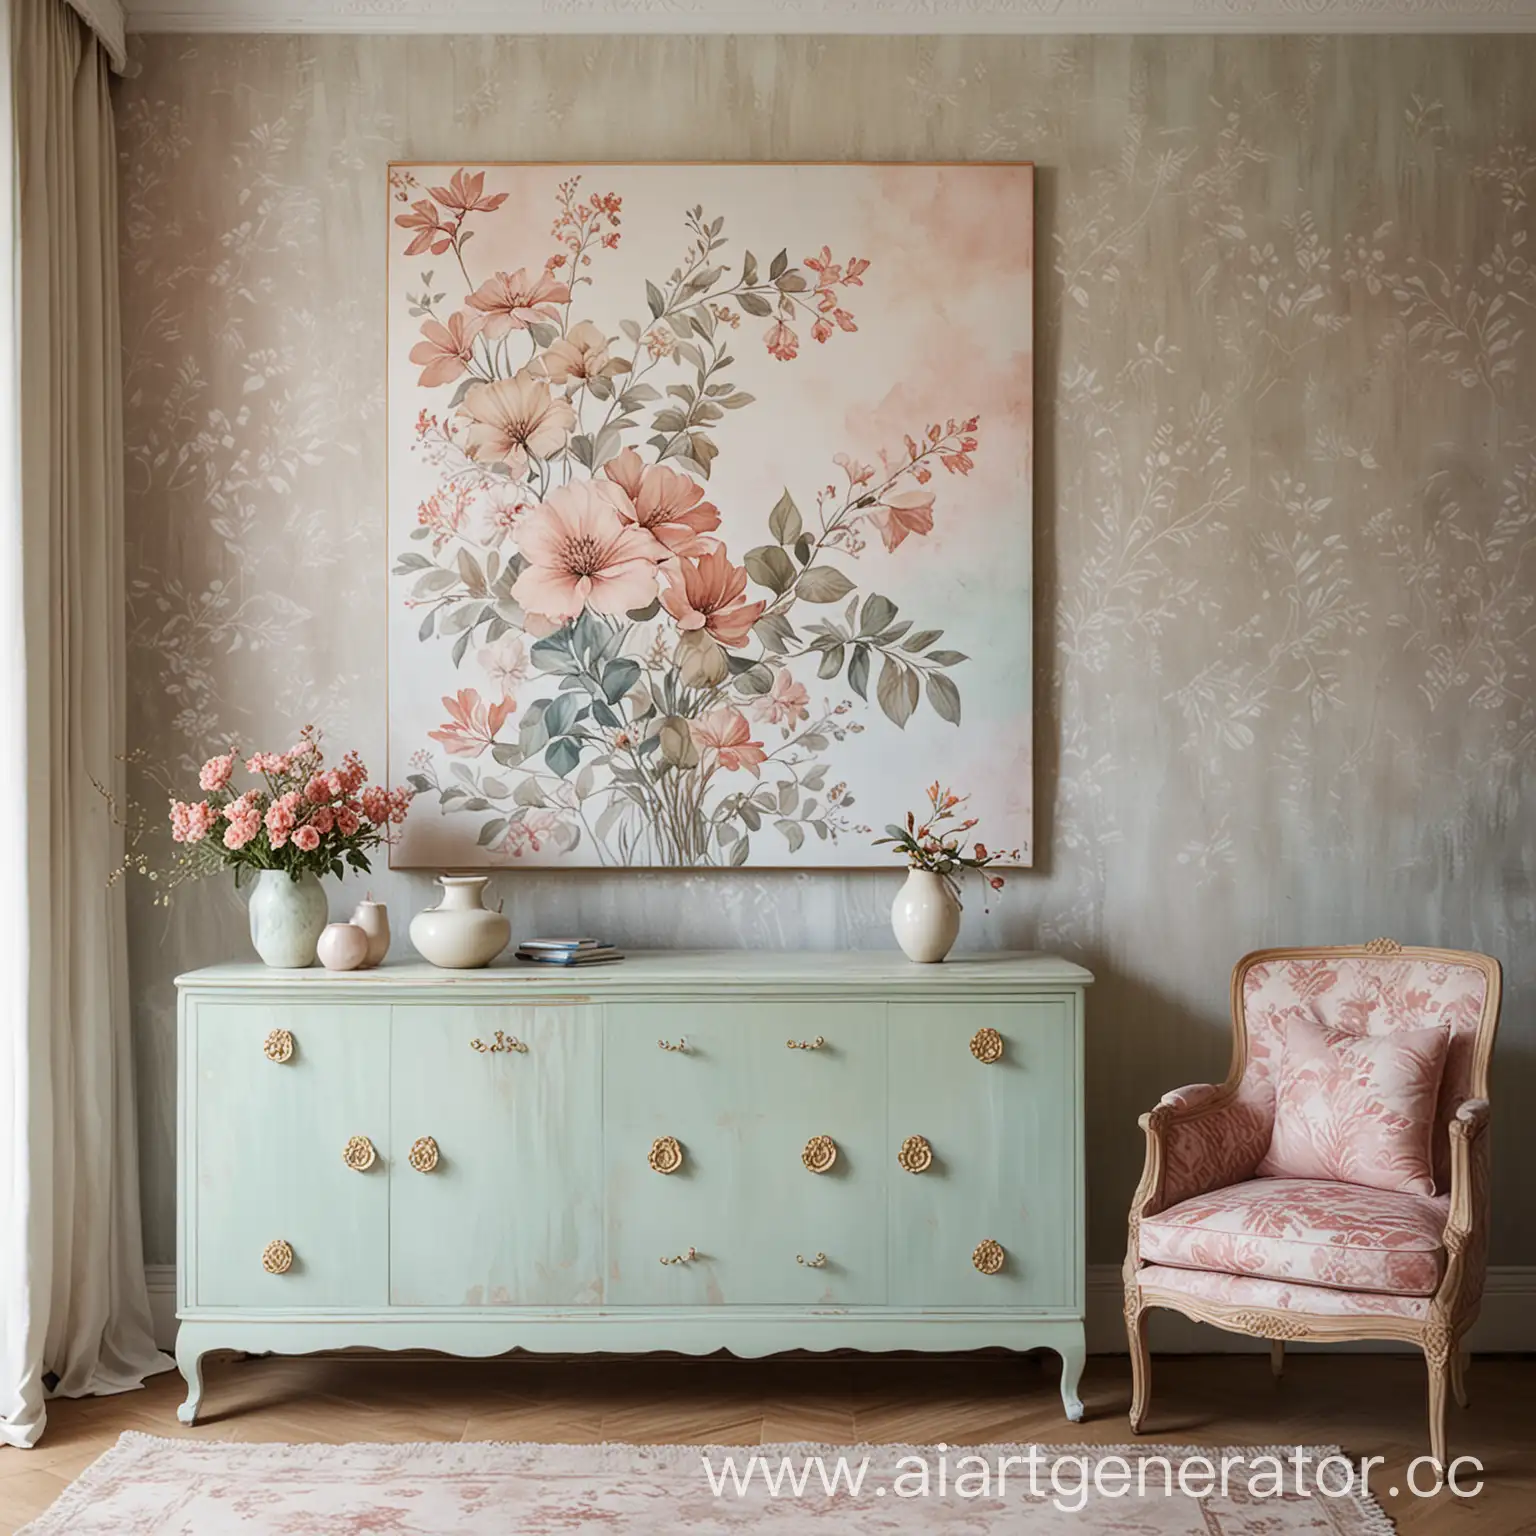 Pastel-Toned-Interior-Design-with-Batik-Floral-Painting-and-Furniture